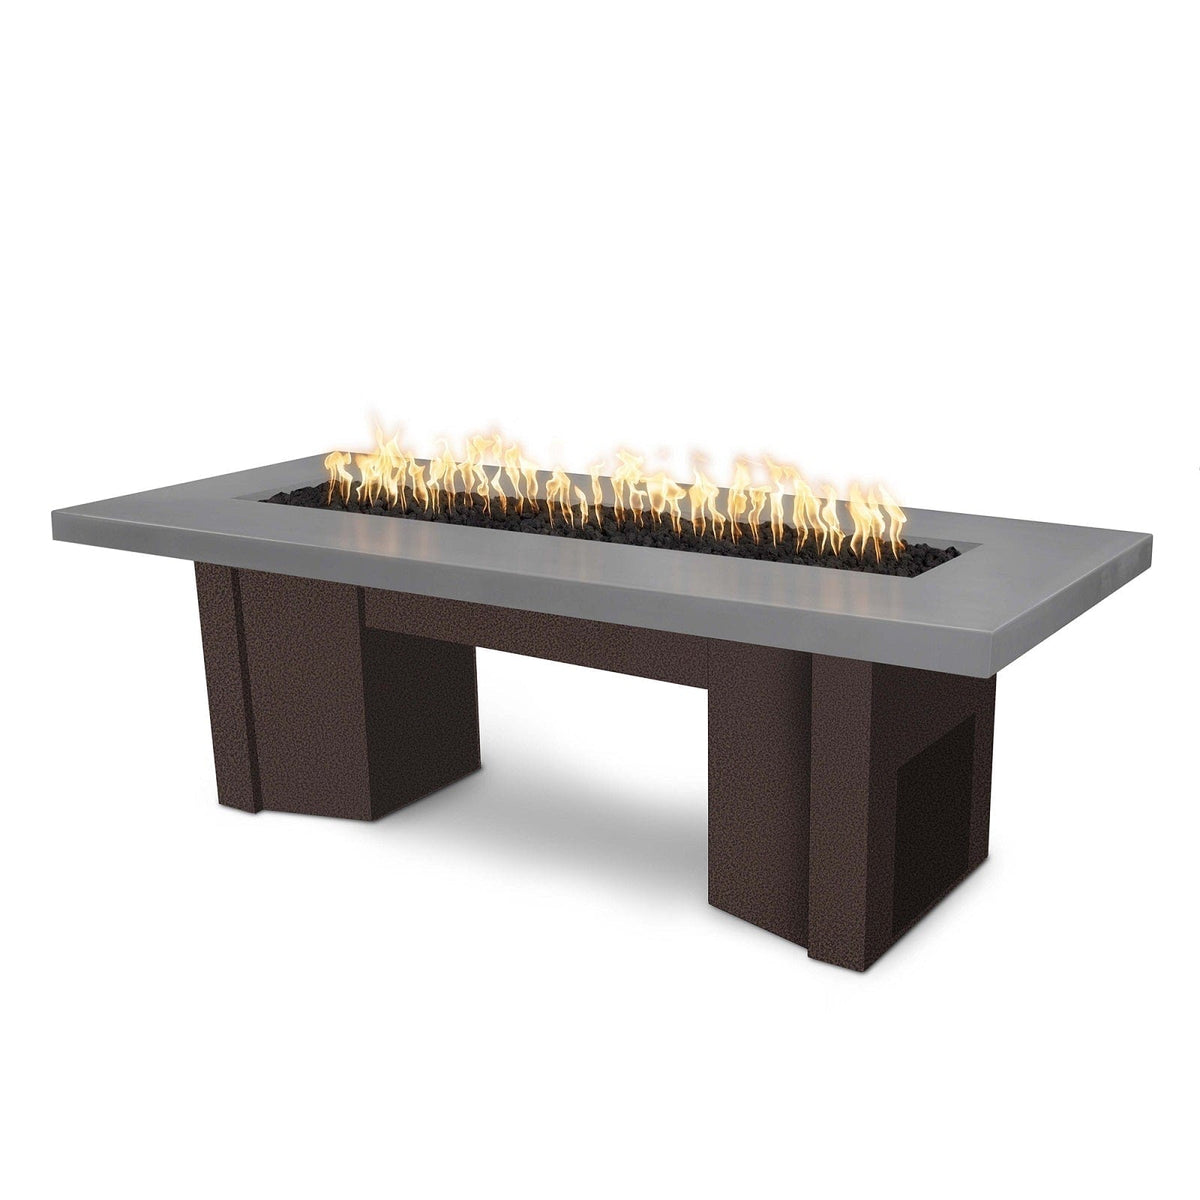 The Outdoor Plus Fire Features Natural Gray (-NGY) / Copper Vein Powder Coated Steel (-CPV) The Outdoor Plus 78&quot; Alameda Fire Table Smooth Concrete in Liquid Propane - 110V Plug &amp; Play Electronic Ignition / OPT-ALMGFRC78EKIT-LP